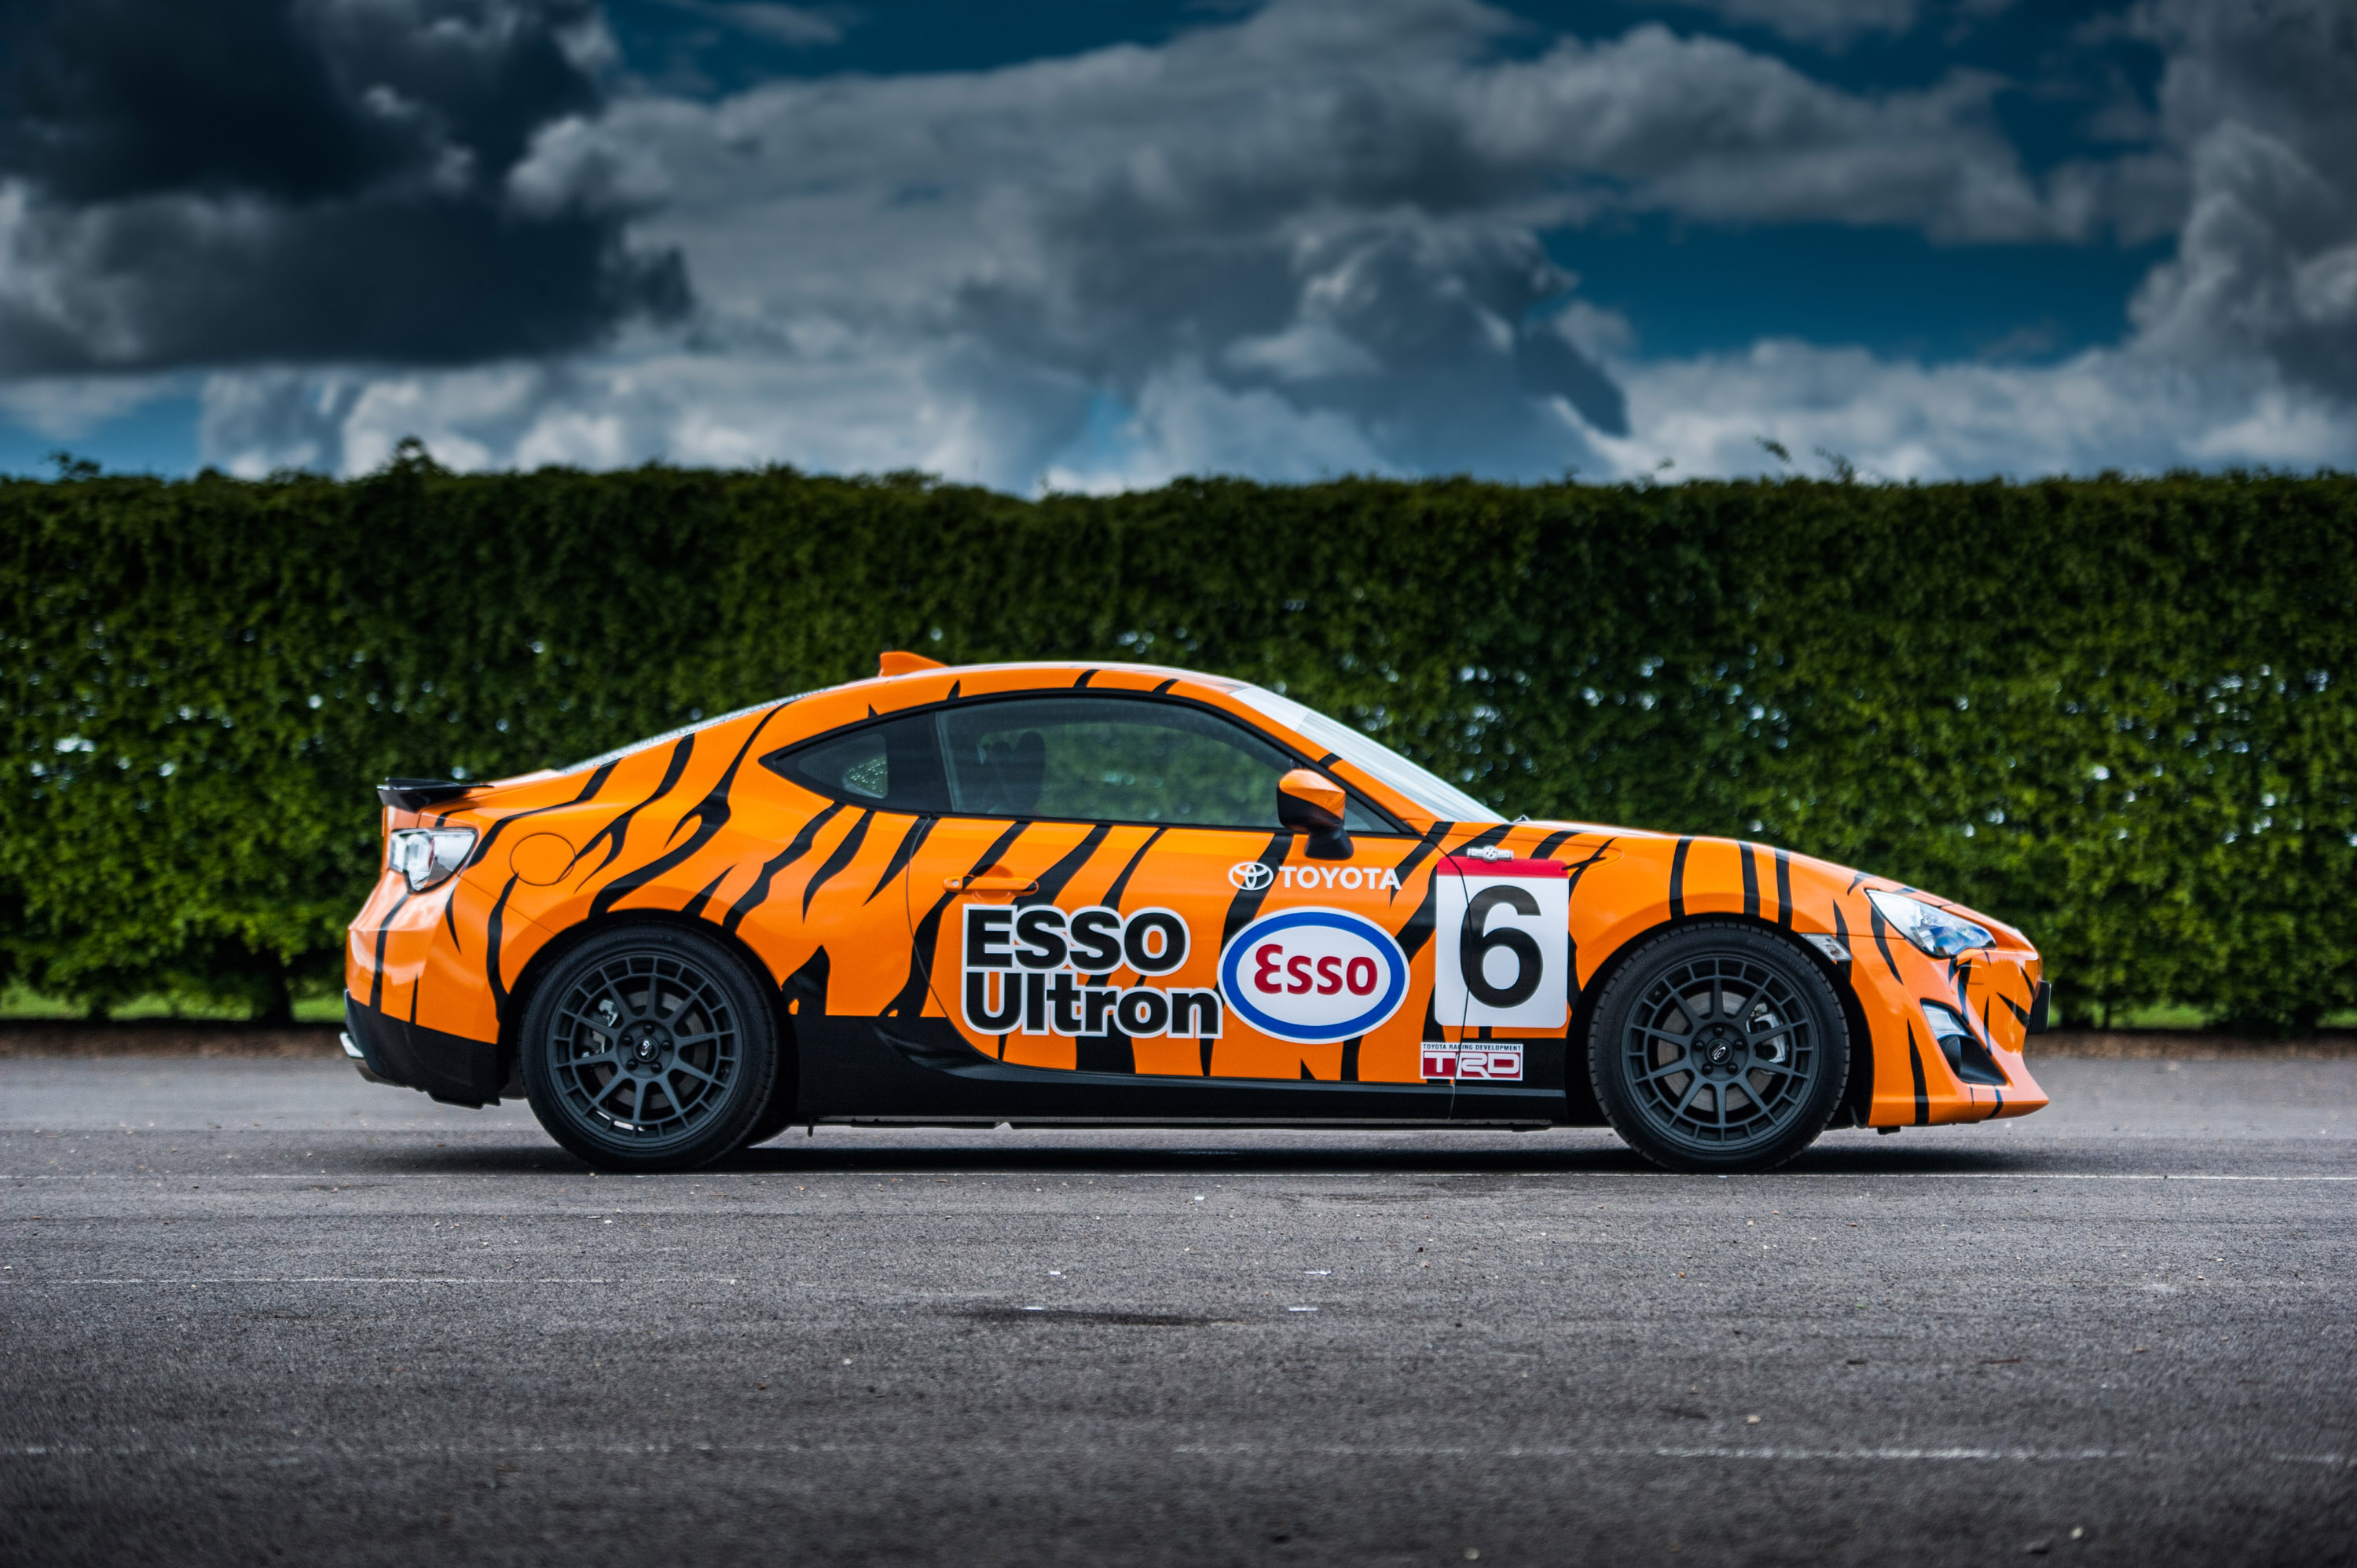 Toyota GT86 in classic liveries